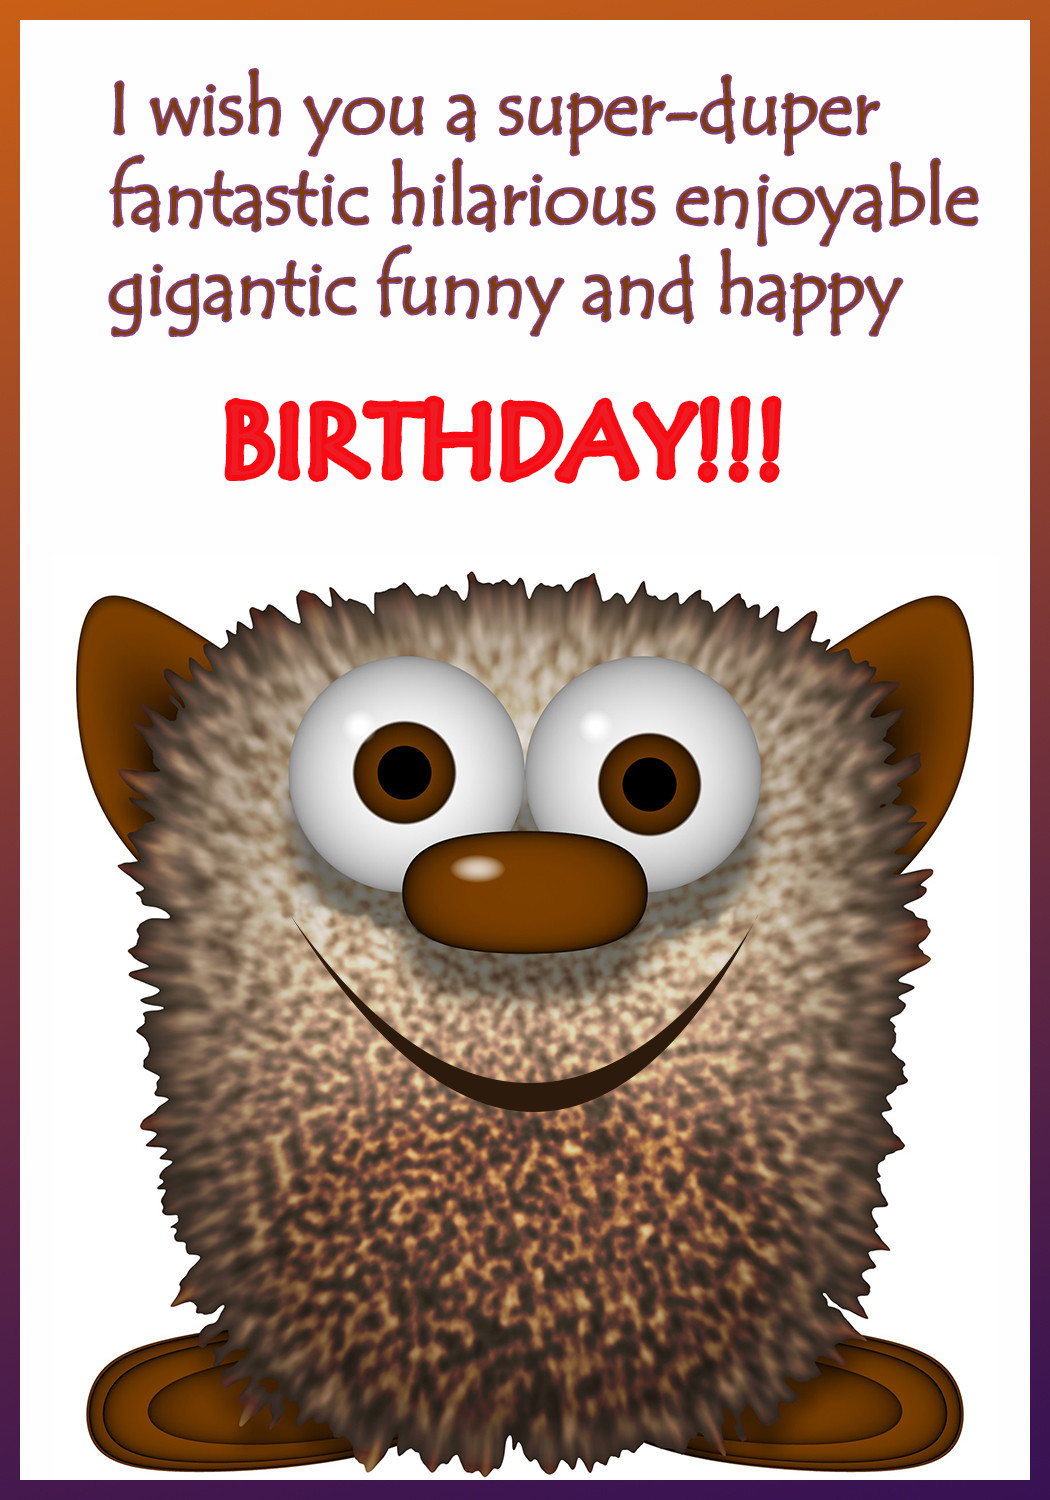 Funny Online Birthday Cards
 Funny Printable Birthday Cards